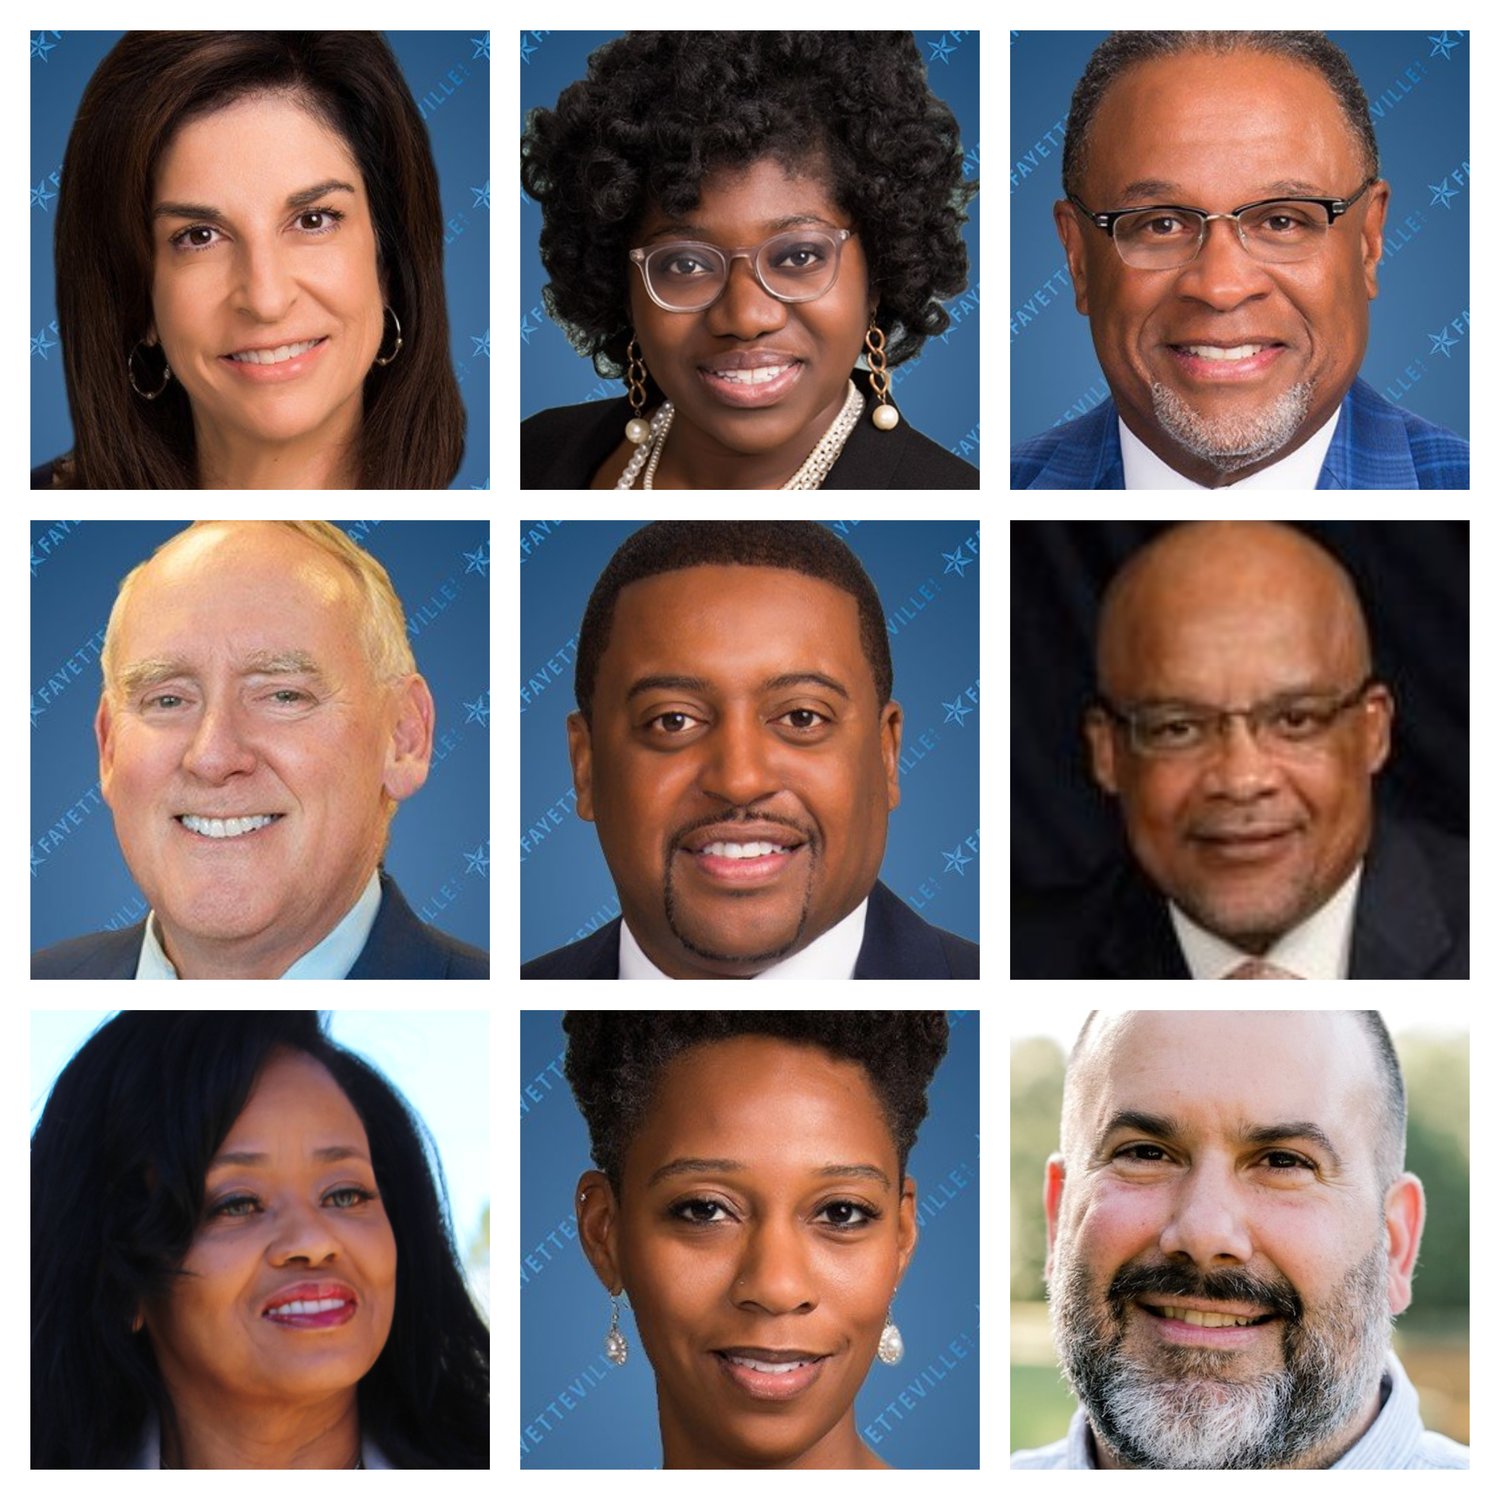 Mayor Mitch Colvin, center, will be sworn in for another term Thursday along with nine members of the City Council. Top, from left: Kathy Keefe Jensen, Shakeyla Ingram, D.J. Haire. Center, from left: Johnny Dawkins, Mitch Colvin and Derrick Thompson. Bottom, from left: Brenda McNair, Courtney Banks-McLaughlin and Deno Hondros. Not pictured is Mario Benavente, who faces a recount Thursday morning in his bid to unseat Antonio Jones.